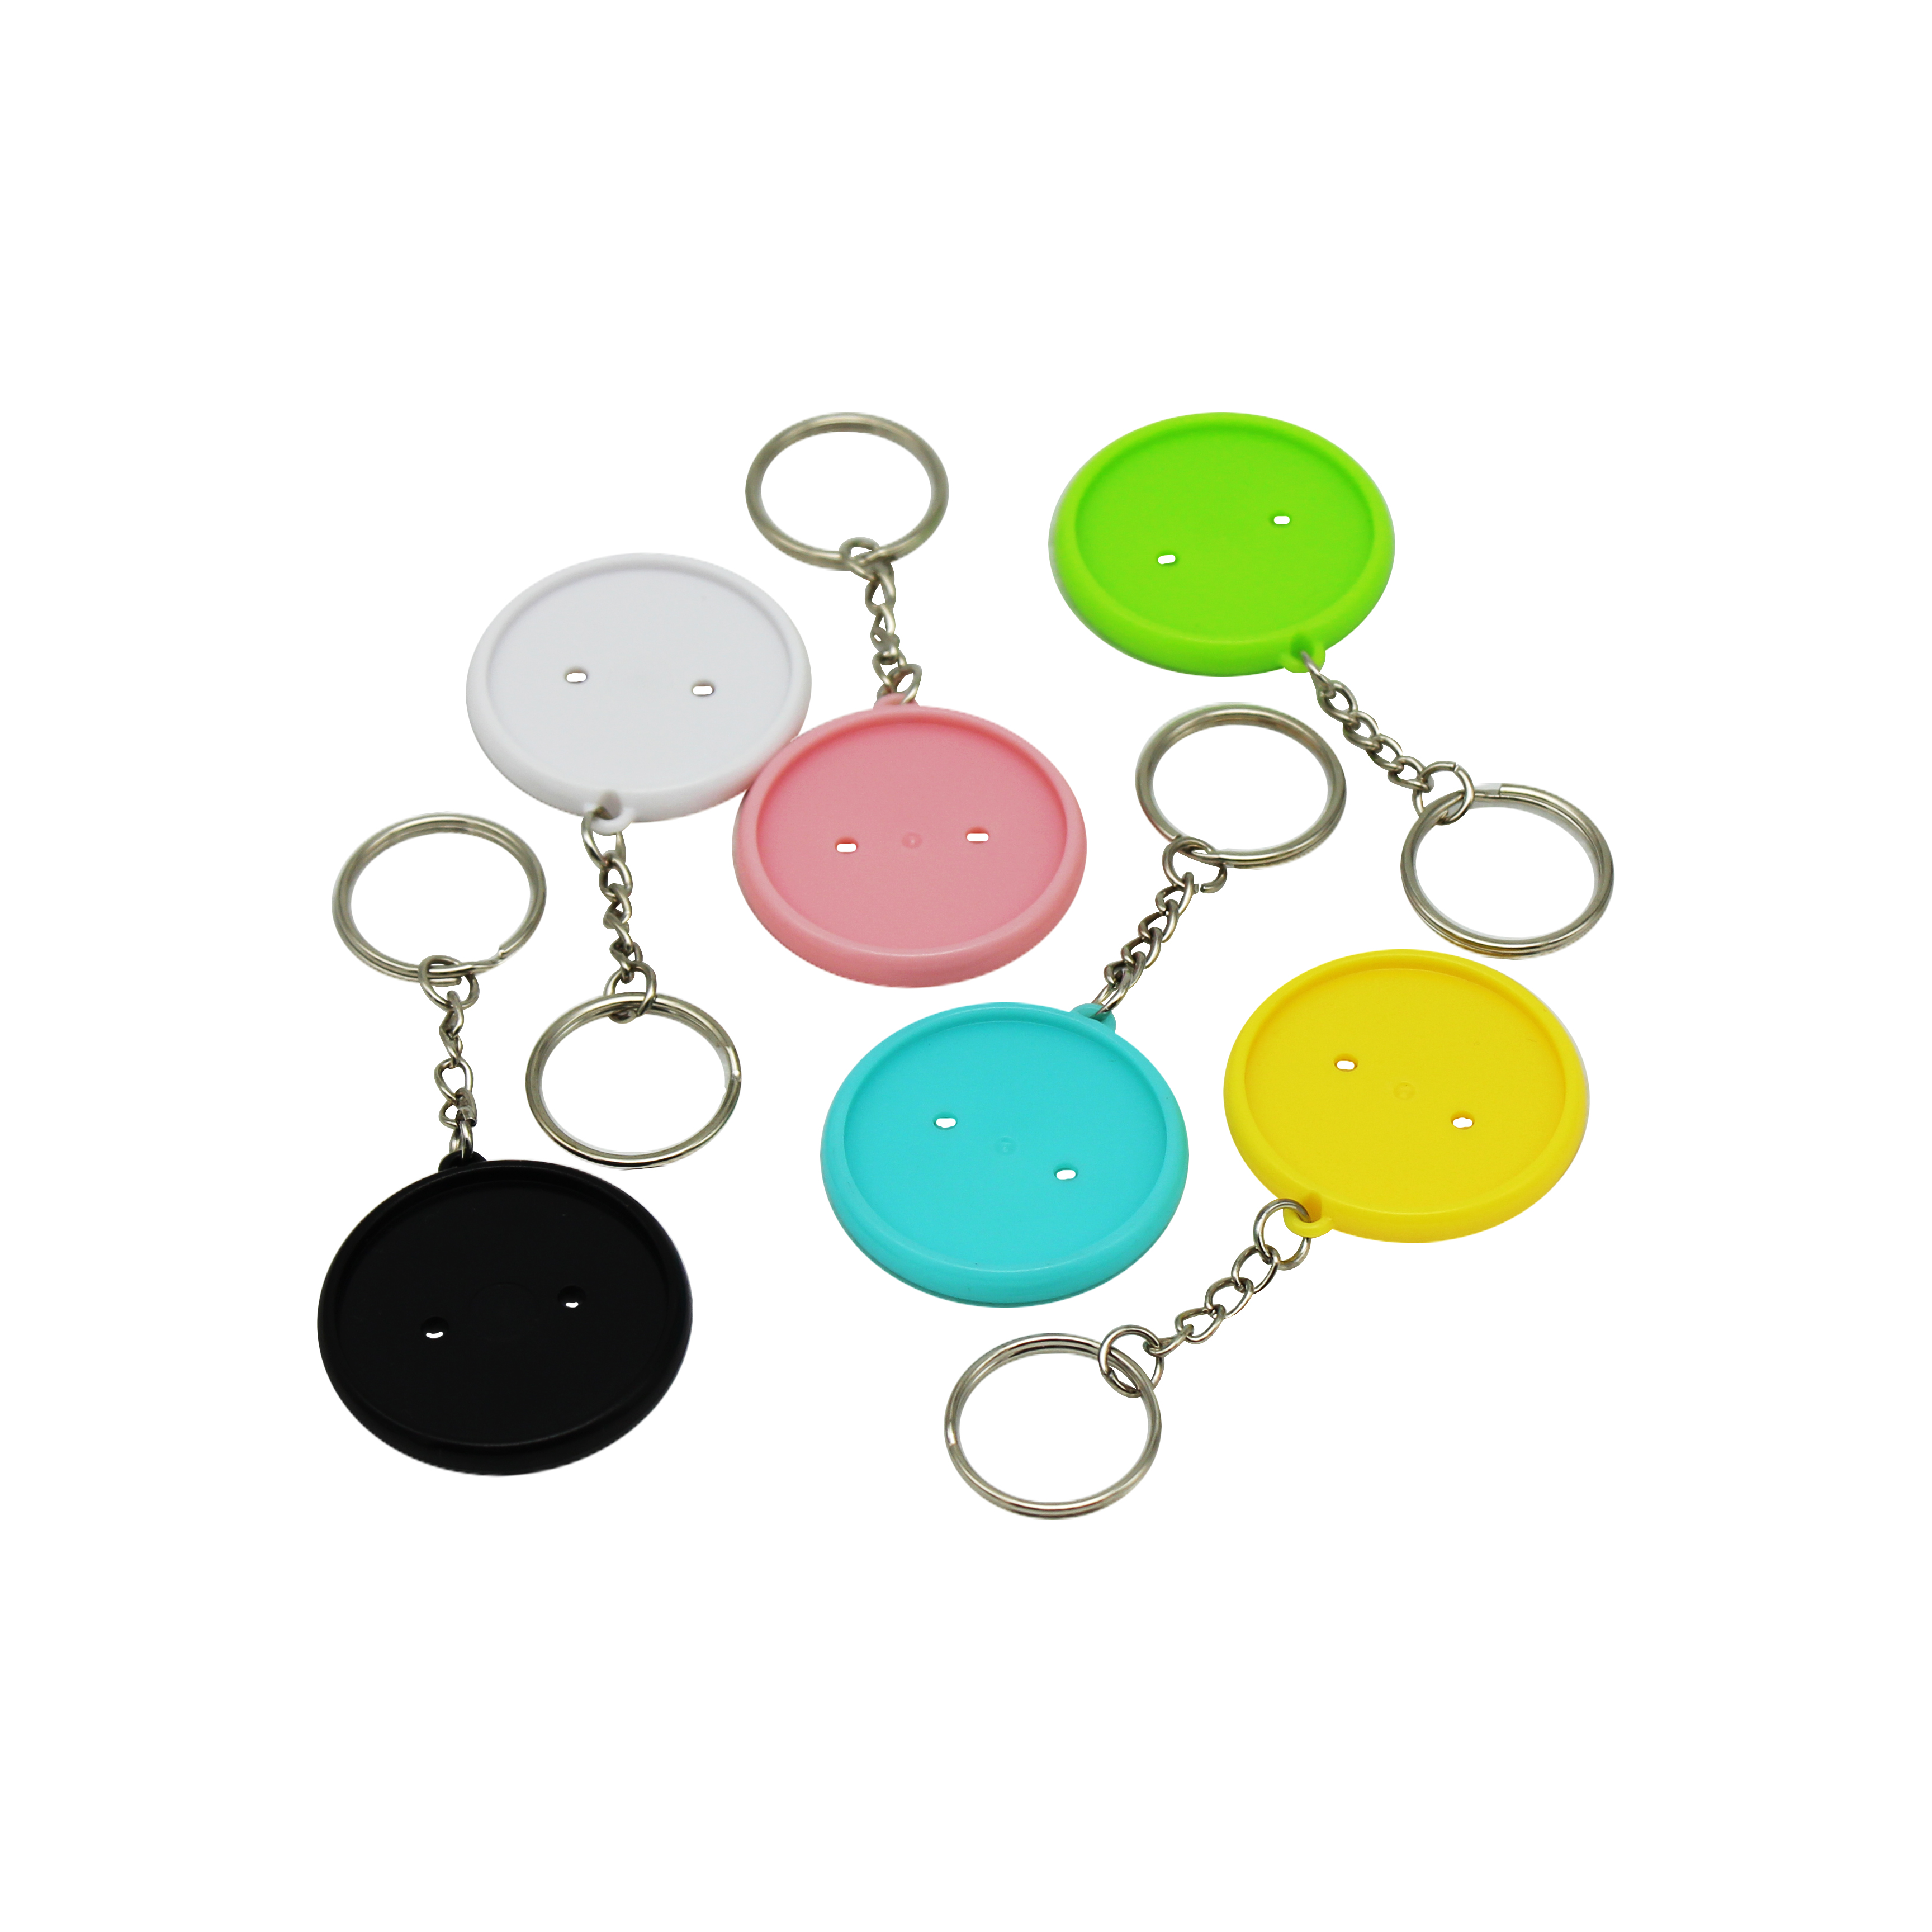 Keychain Parts - 37mm Round Double-Sided Keychain (100 sets